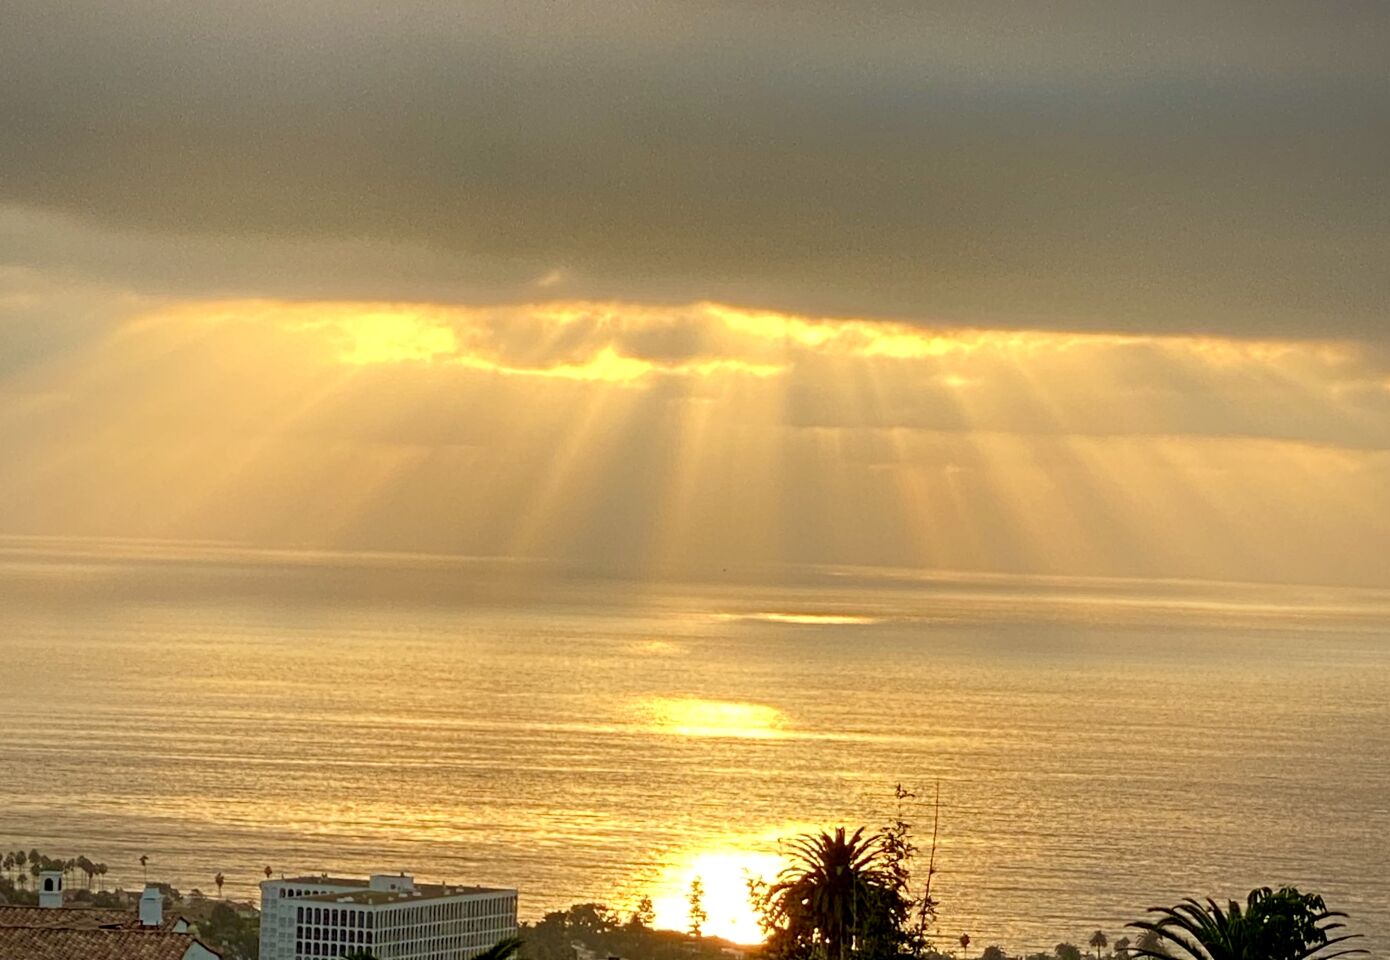 Clouds and sun mix over the ocean off La Jolla.